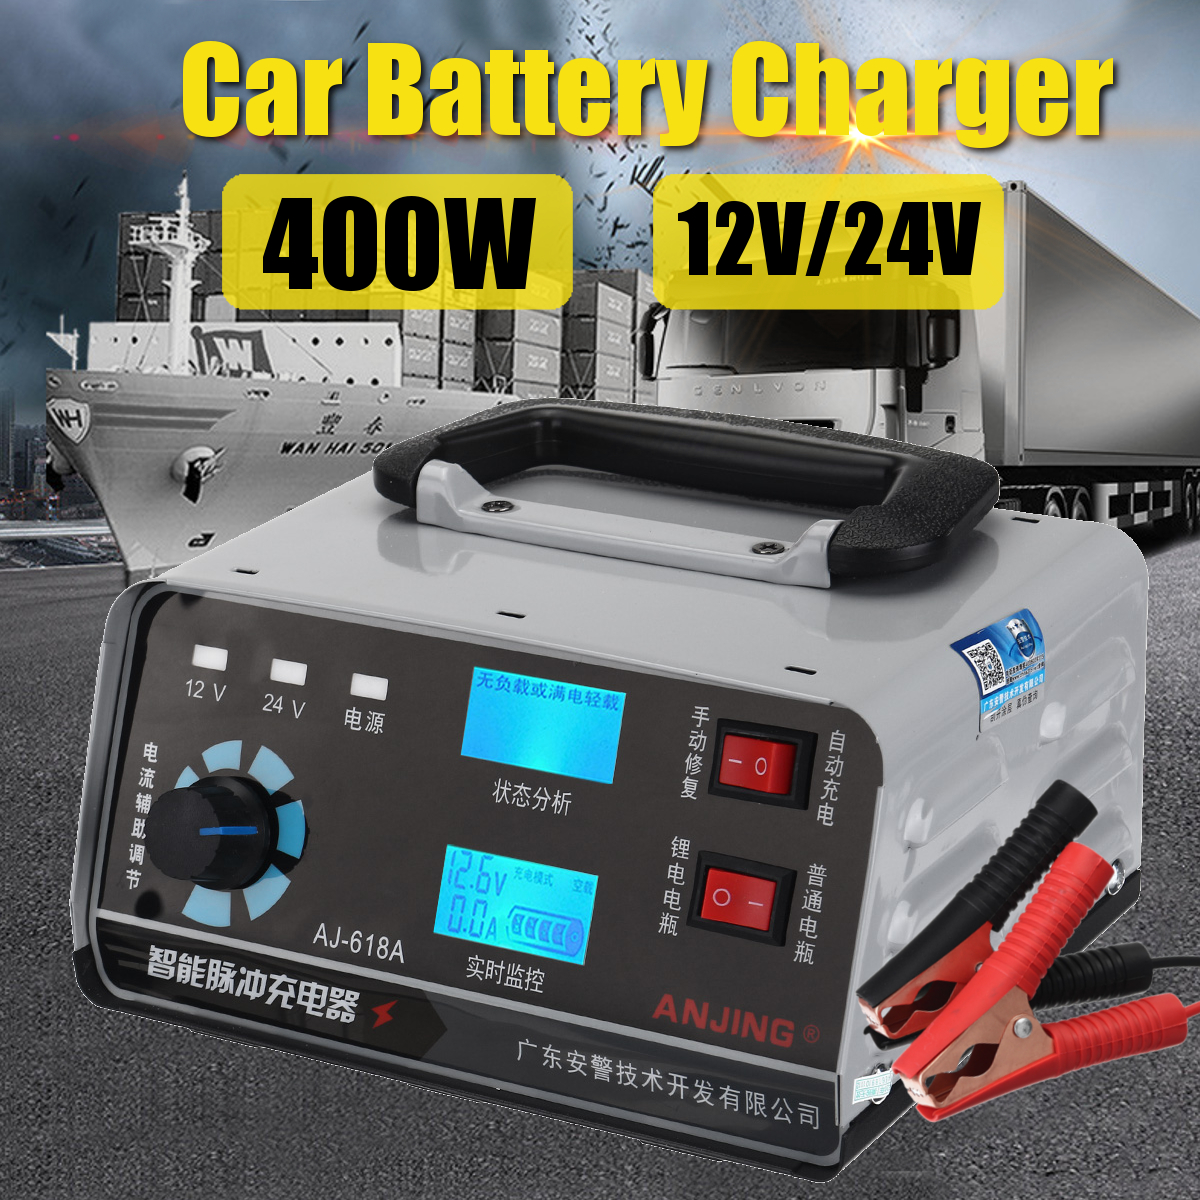 400W-12V24V-Universal-Electric-Car-Battery-Charger-Automobile-Motorcycle-Auto-Repair-Battery-Chargin-1695747-4